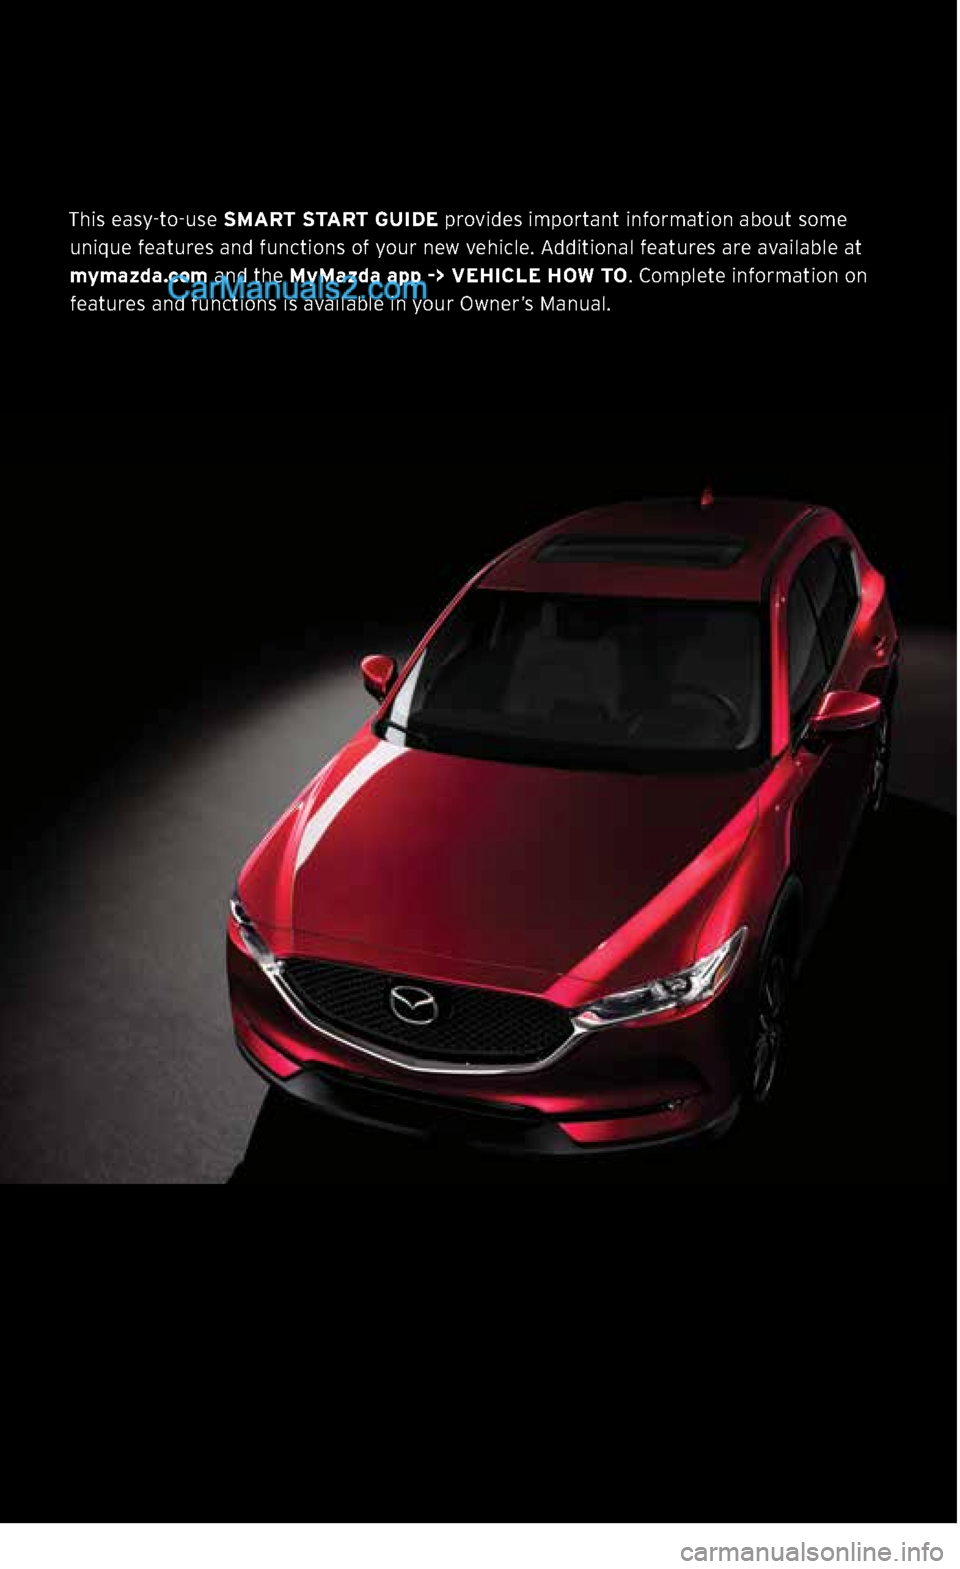 MAZDA MODEL CX-5 2017  Smart Start Guide (in English) This easy-to-use SMART START GUIDE provides important information about some unique features and functions of your new vehicle. Additional features are available at mymazda.com and the MyMazda app -> 